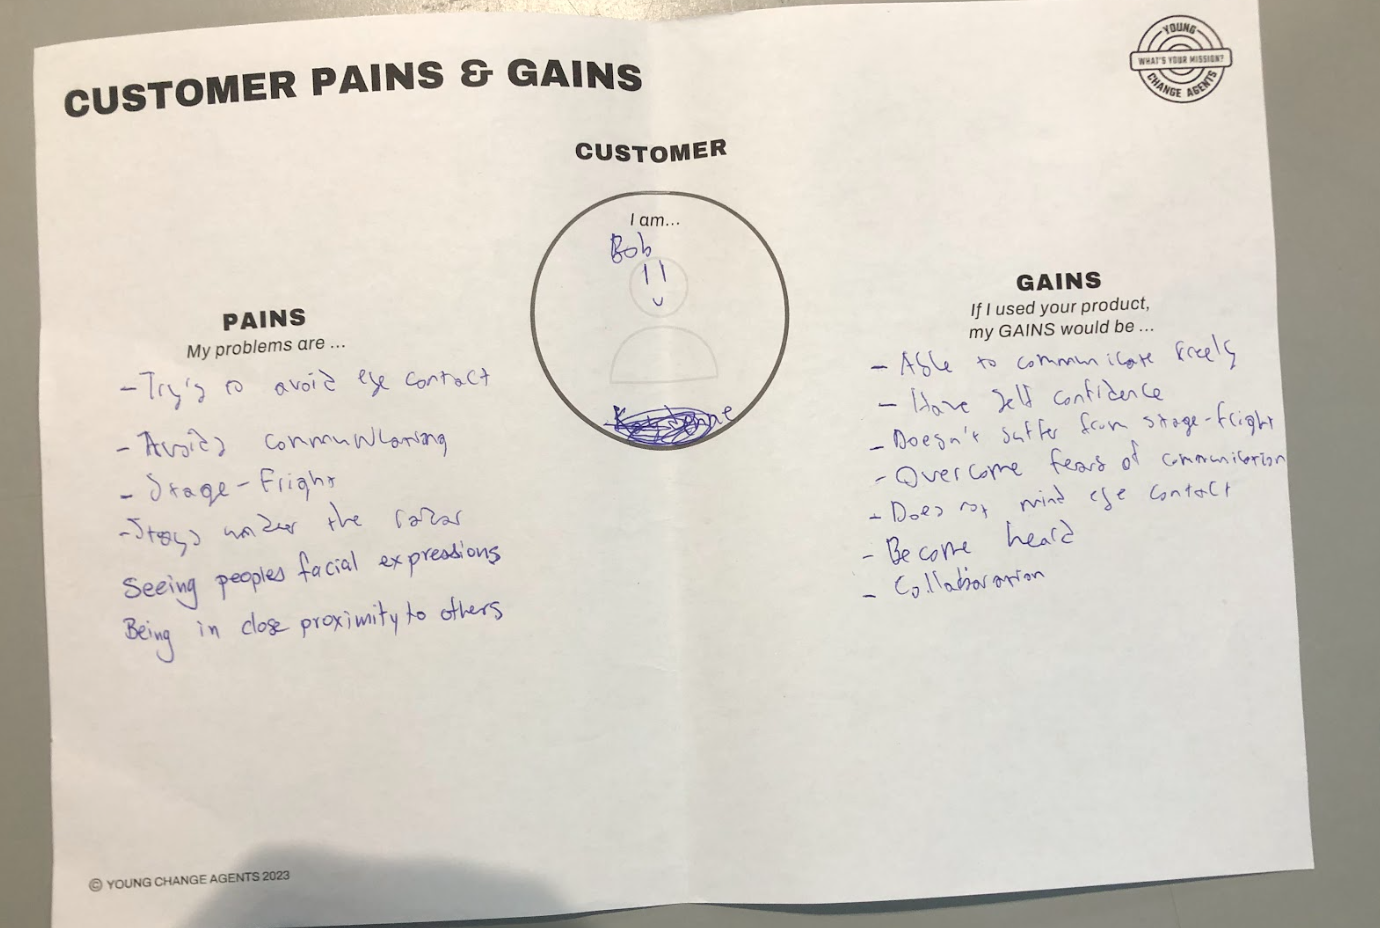 CUSTOMER PAINS AND GAINS